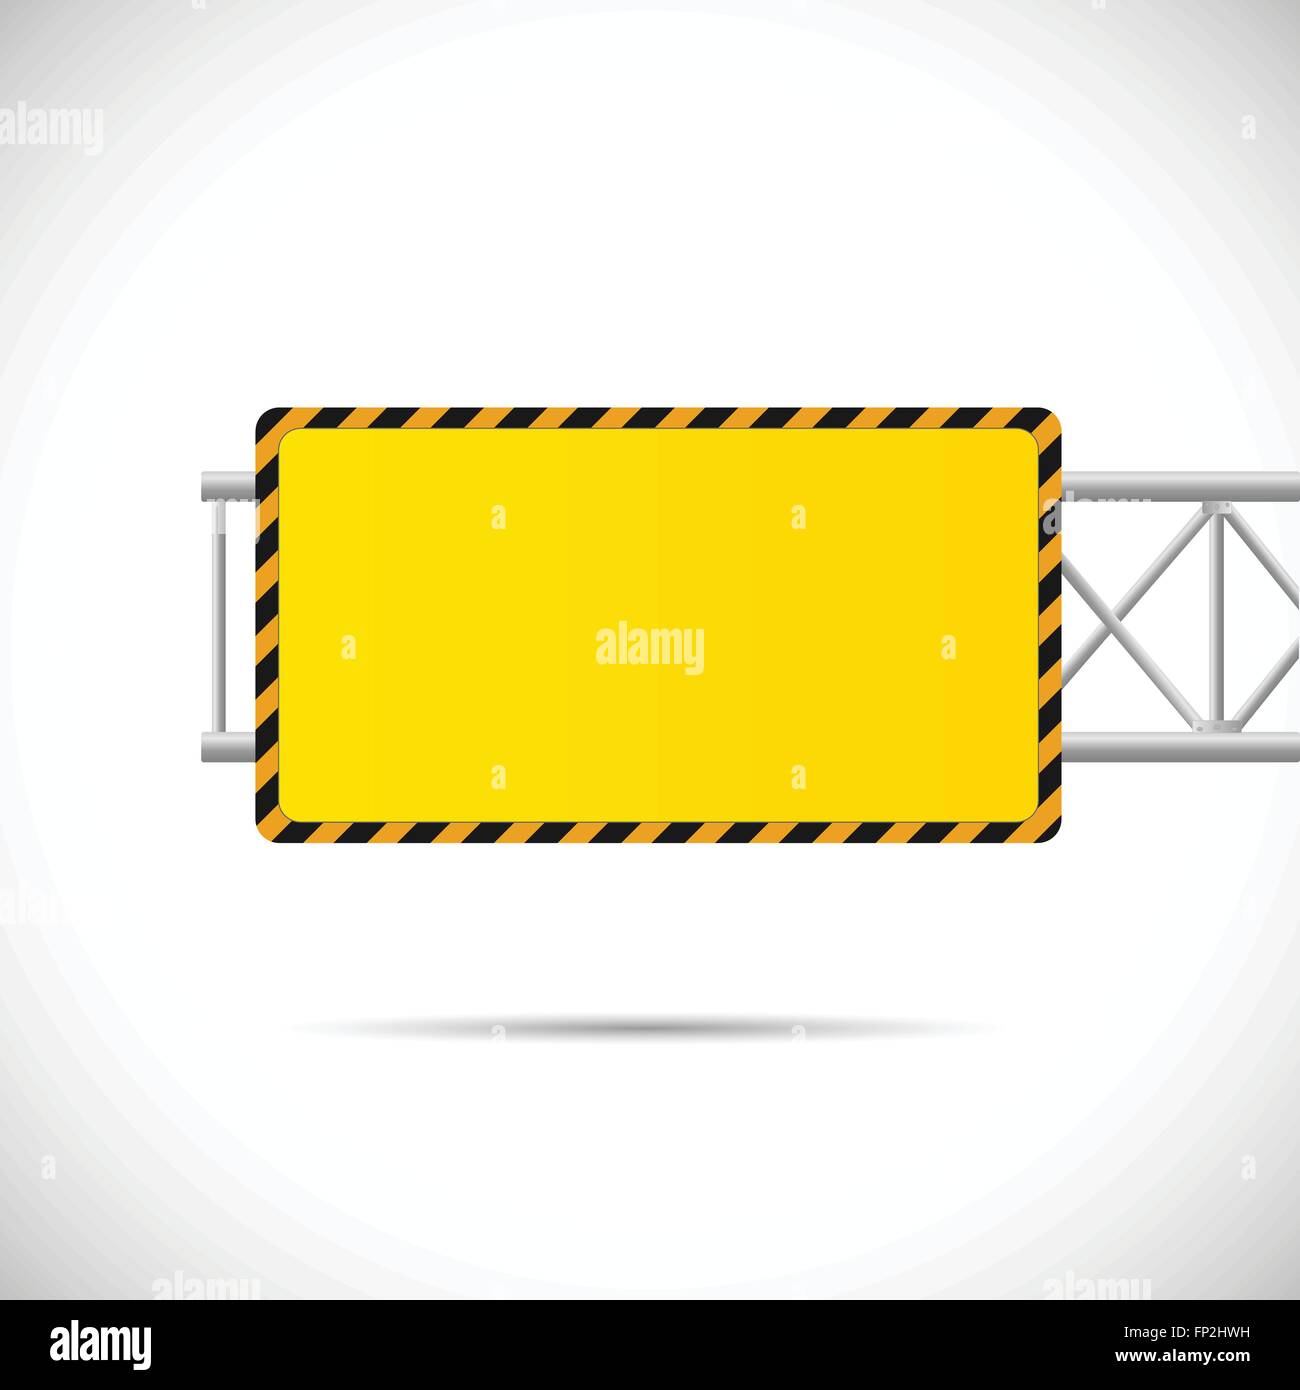 Illustration of a construction road sign isolated on a white background. Stock Vector